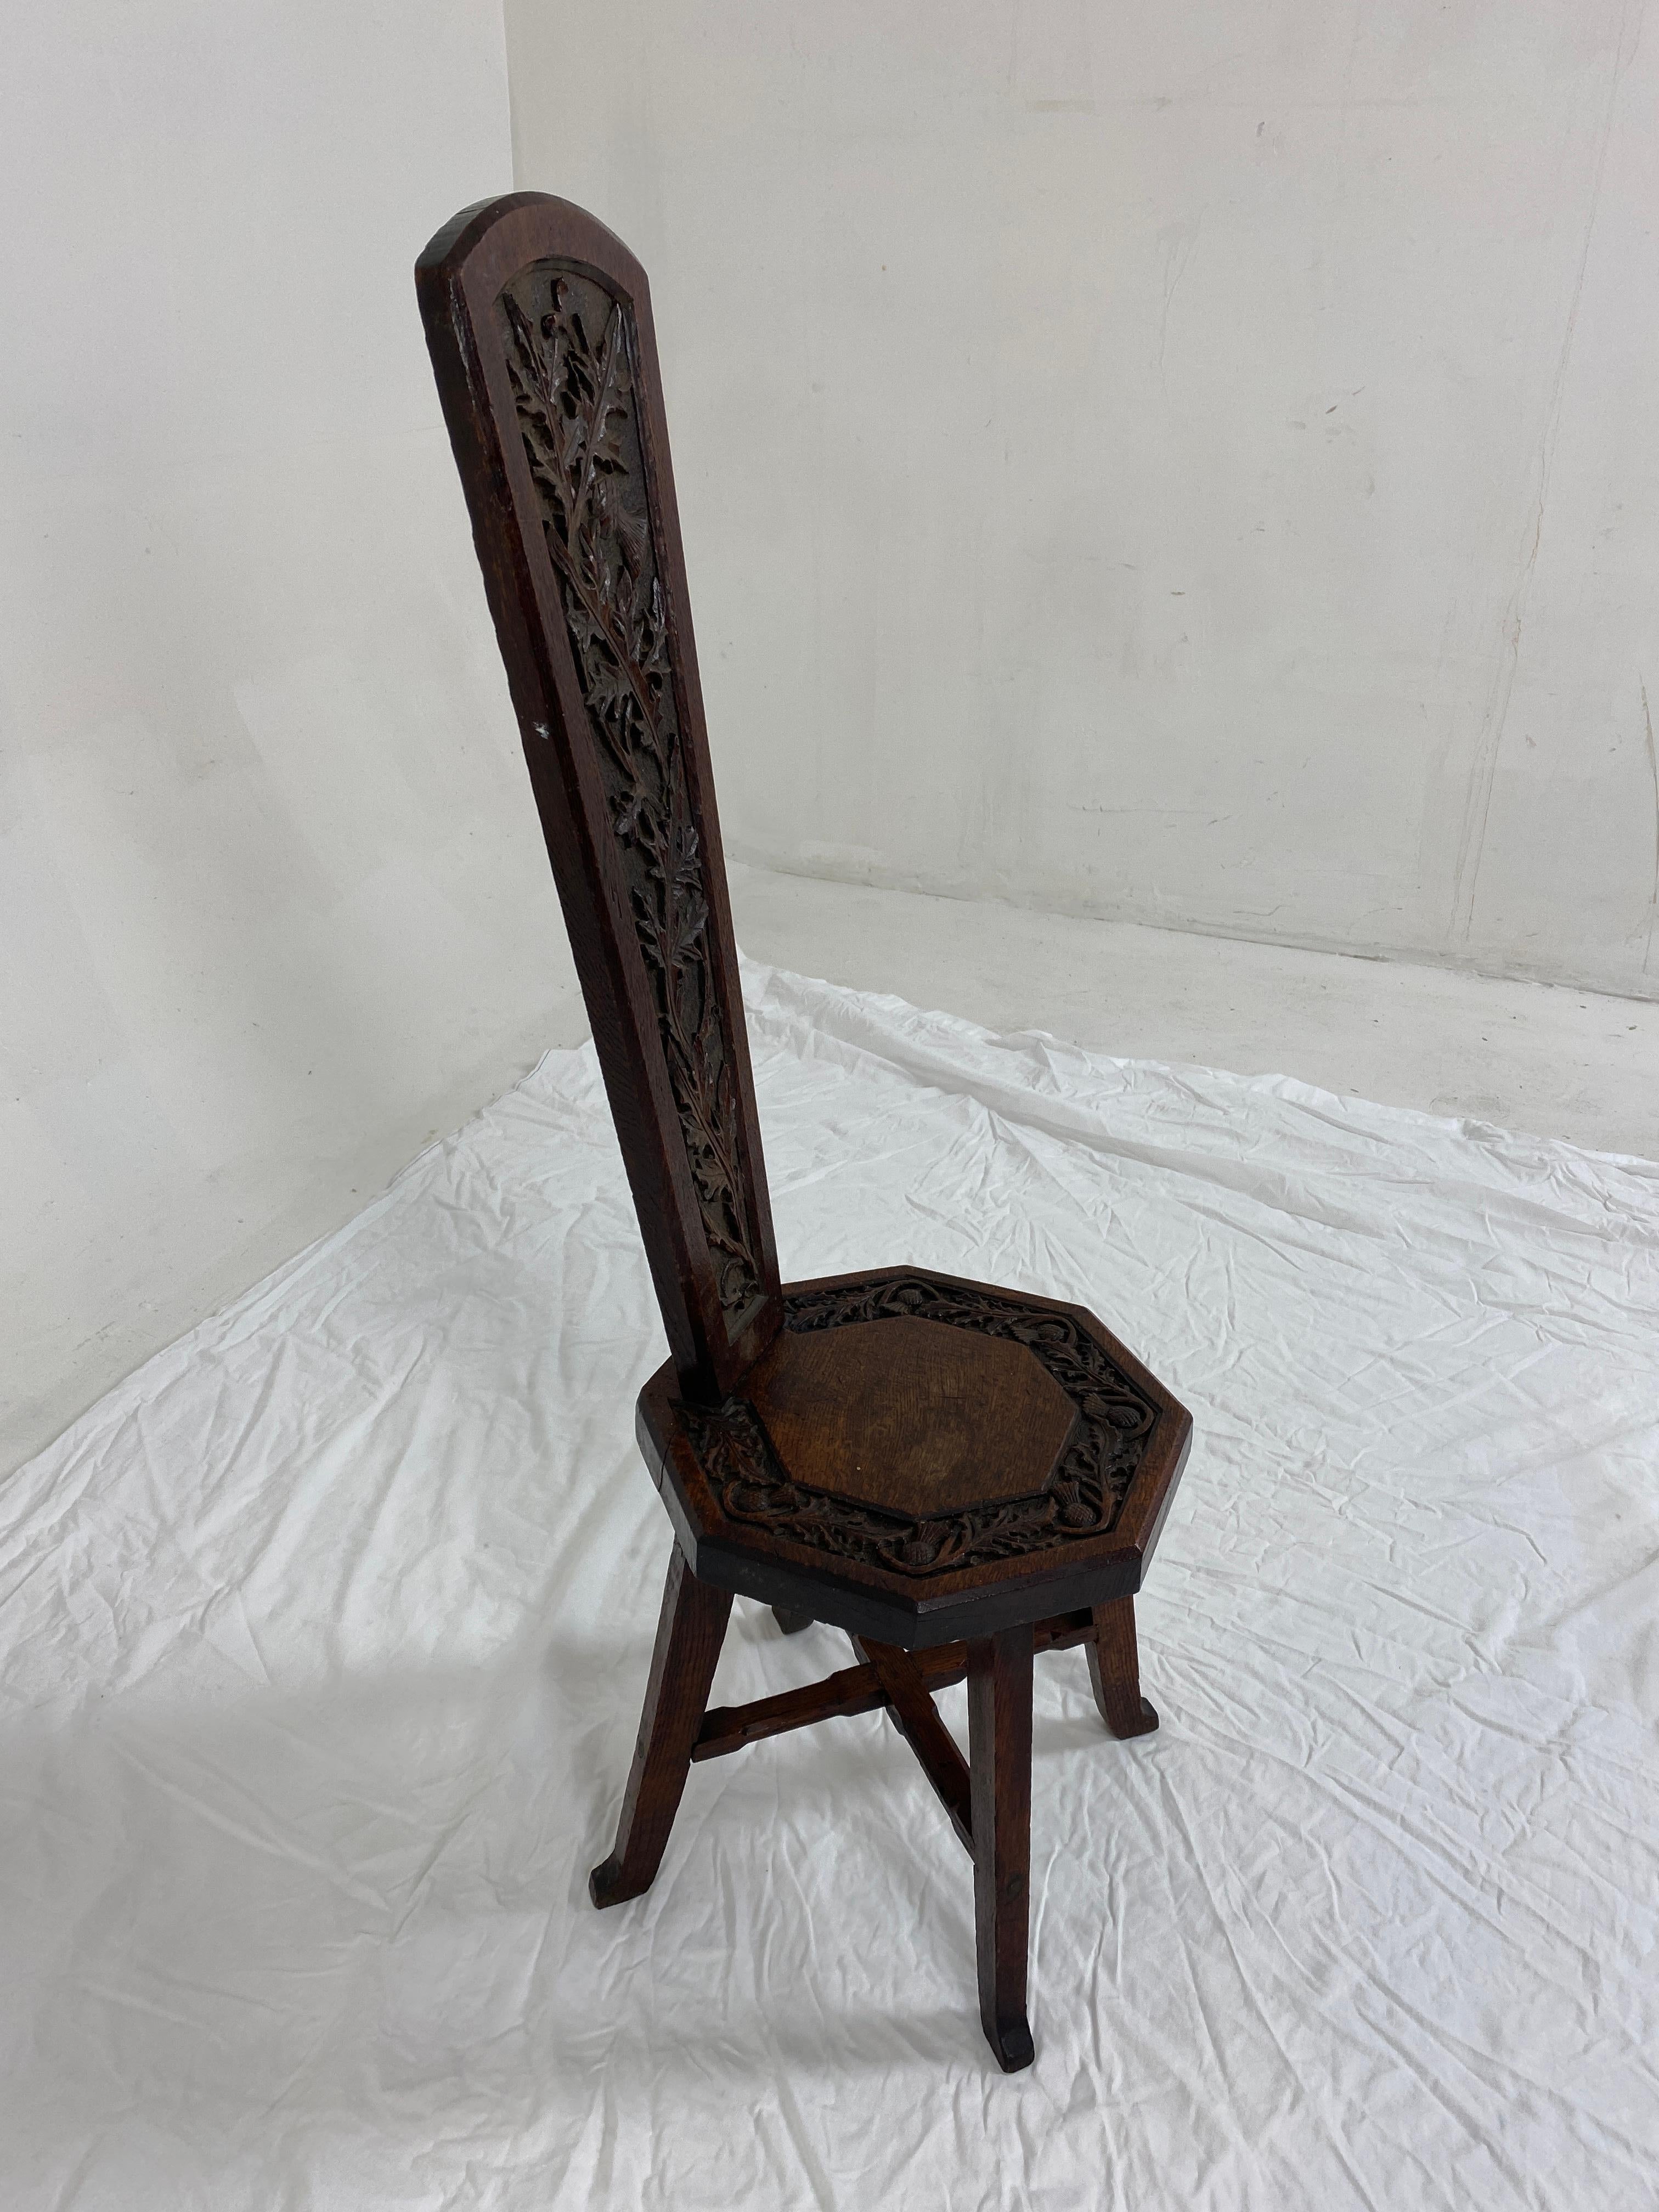 Ant. Victorian carved oak spinning chair thistles, Scotland 1890, H850.

Scotland 1890
Solid oak
Original finish
Highly carved back with branches and thistles
Craved wooden seat
All standing on tapering legs with turned stretchers
Very nice